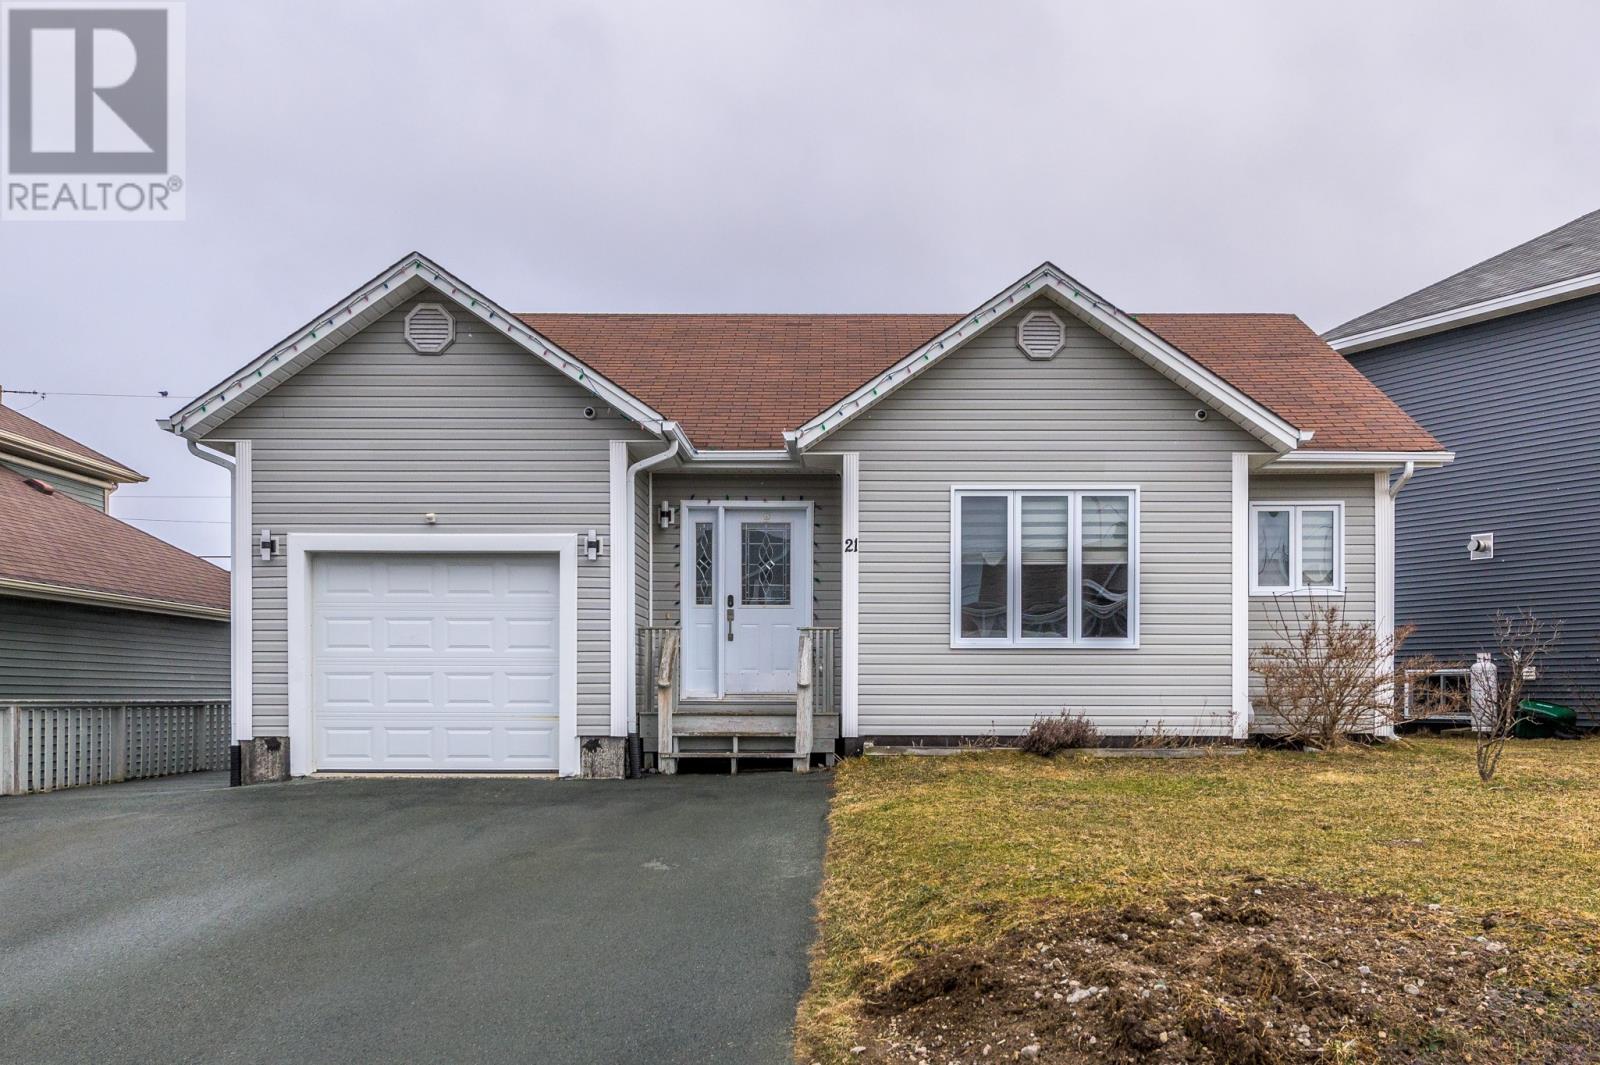 21 Curden Place, Conception Bay South, A1X0A7, 3 Bedrooms Bedrooms, ,3 BathroomsBathrooms,Single Family,For sale,Curden,1268950